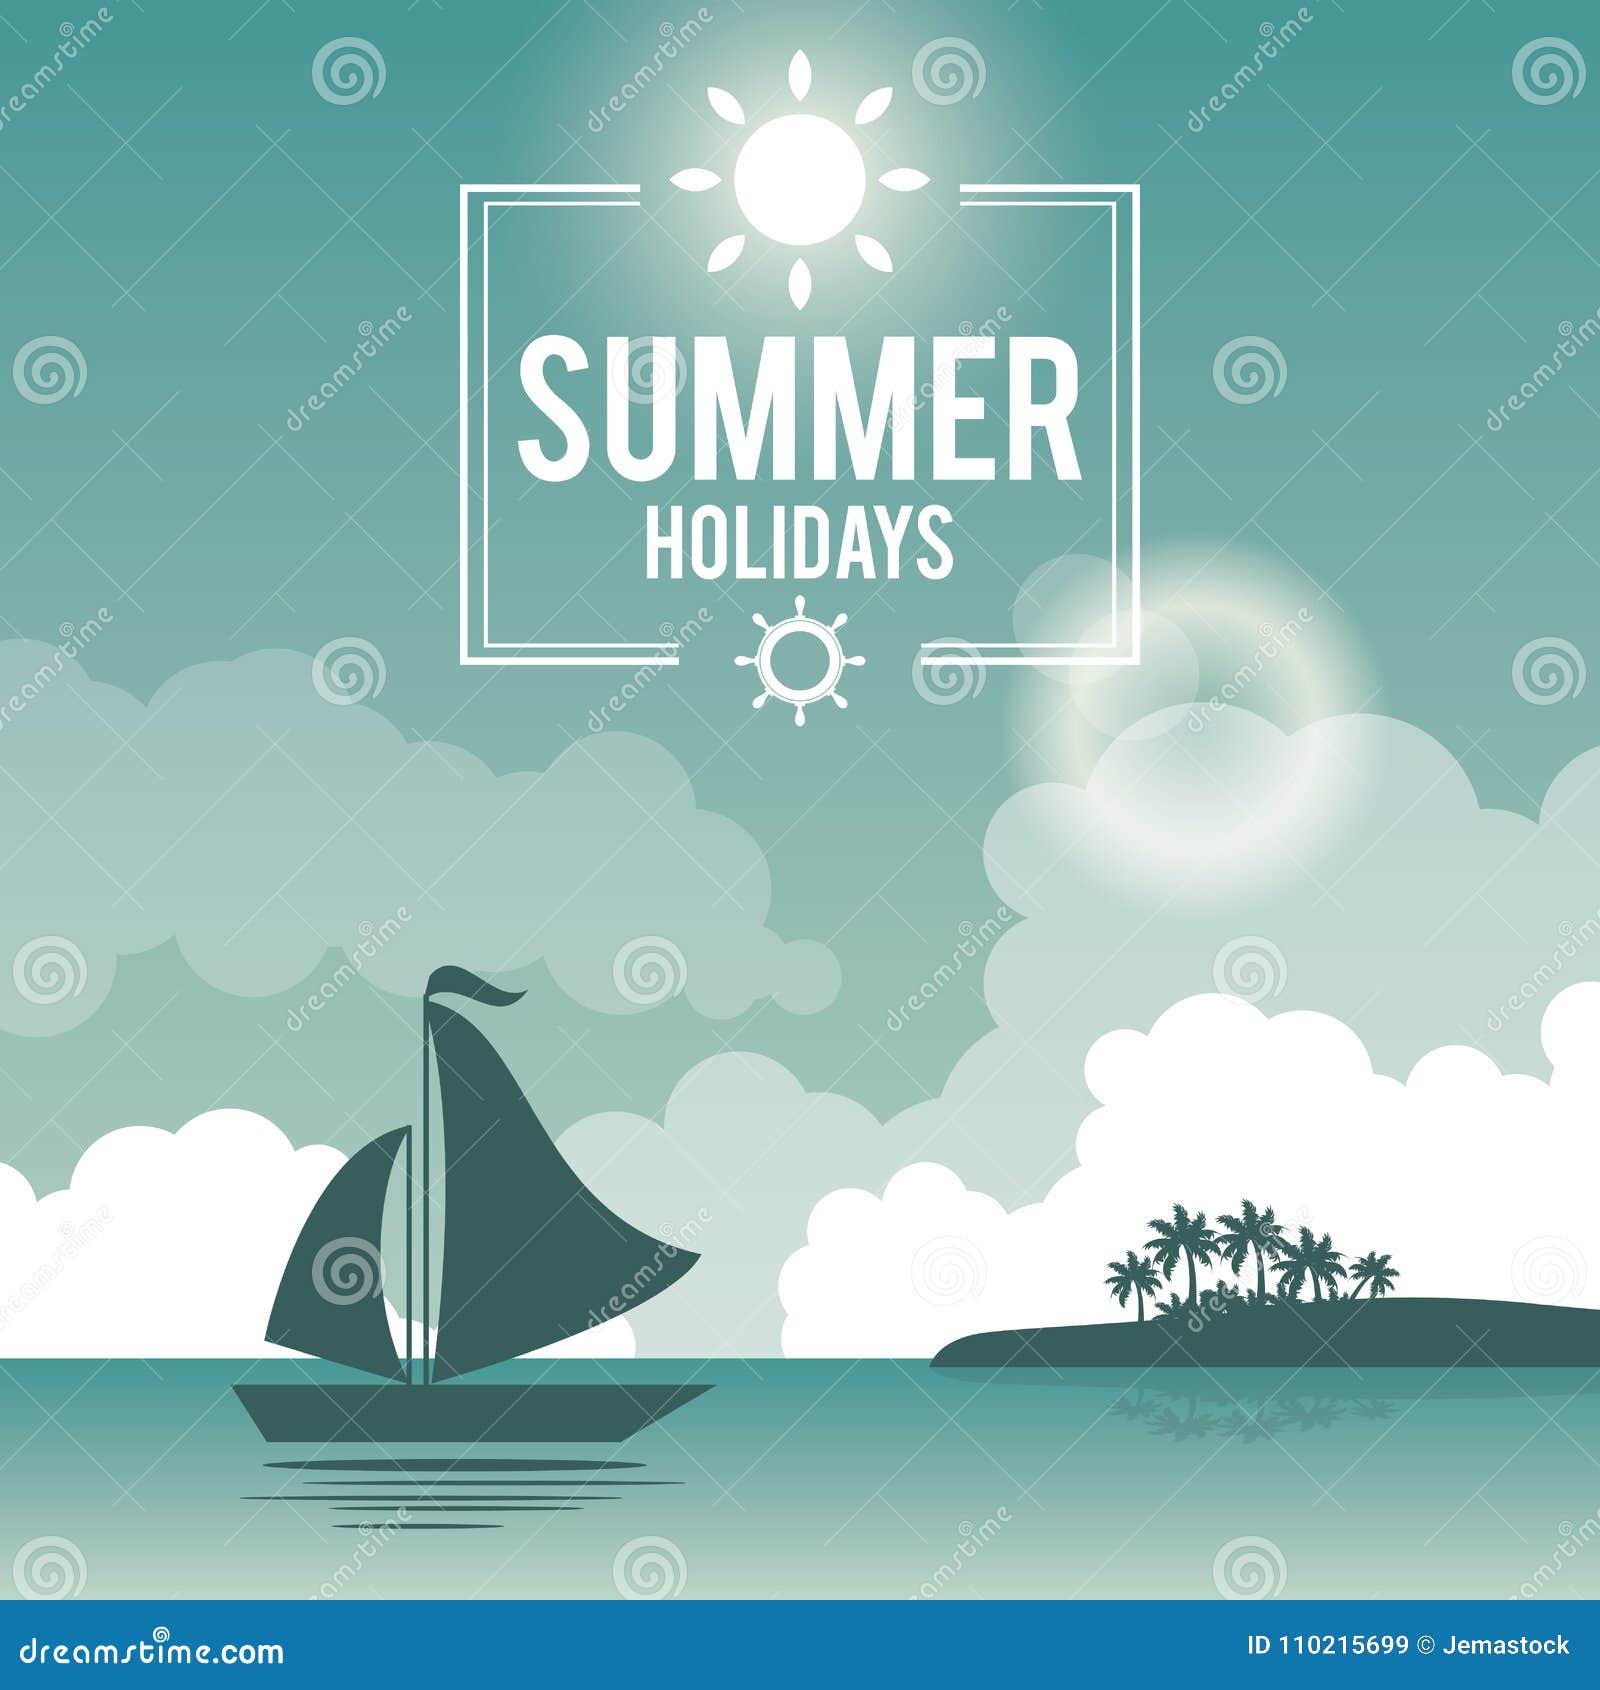 beautiful poster seaside with logo summer holydays and yacht